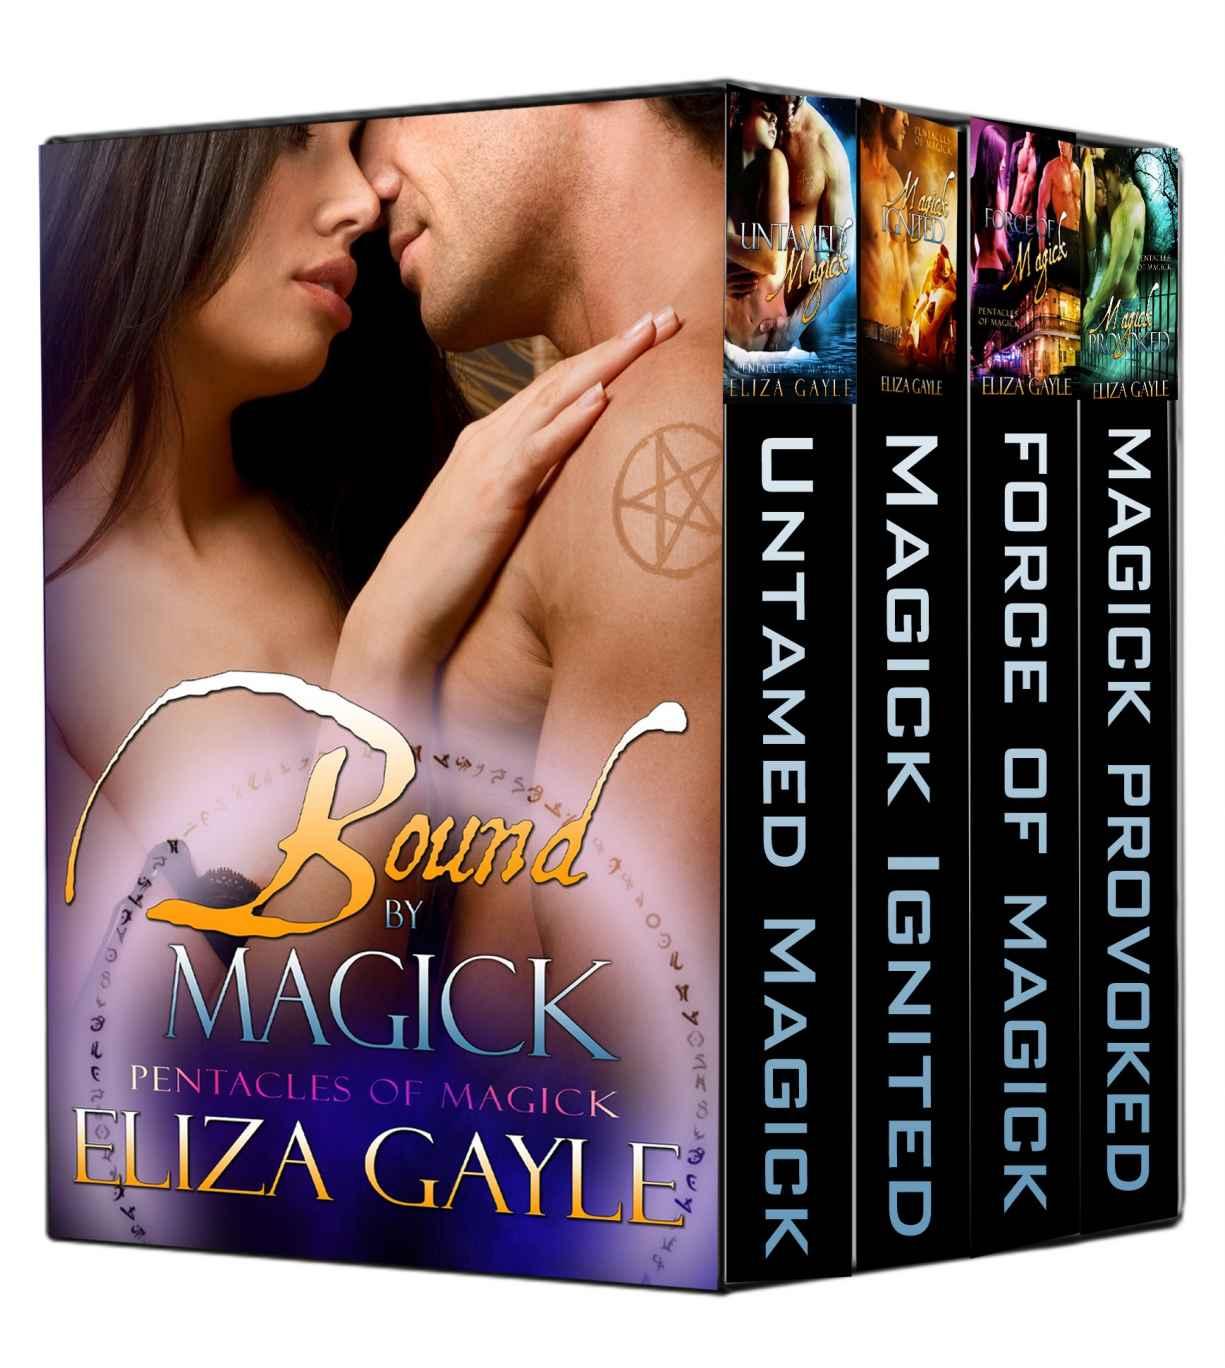 Bound by Magick 4-in-1 Box Set (Pentacles of Magick) by Eliza Gayle